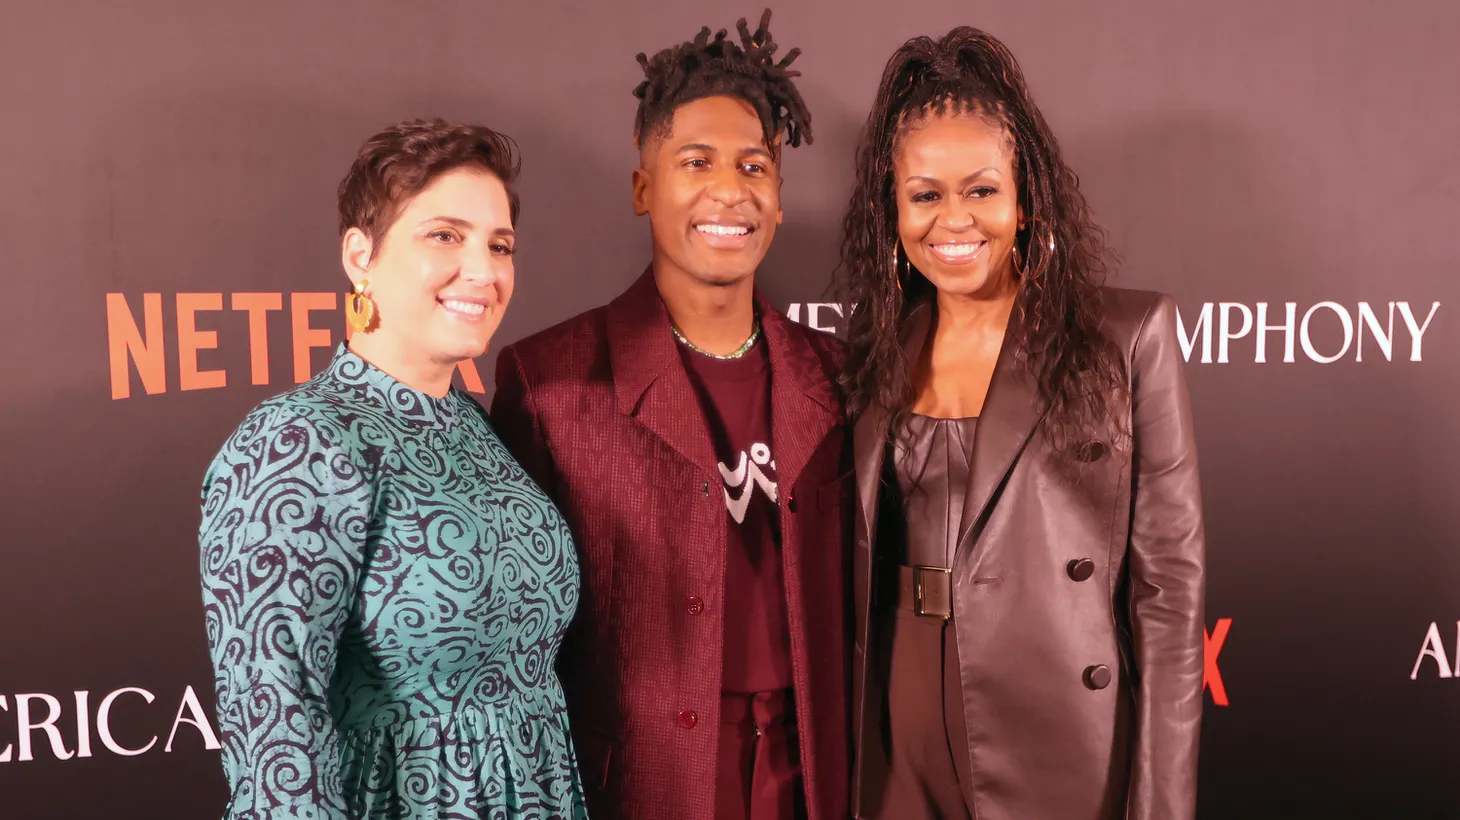 Suleika Jaouad, Jon Batiste and Michelle Obama all participate in red carpet activities for a special screening of the Netflix documentary American Symphony at the Orpheum Theater in New Orleans, Louisiana on Thursday, December 7, 2023.